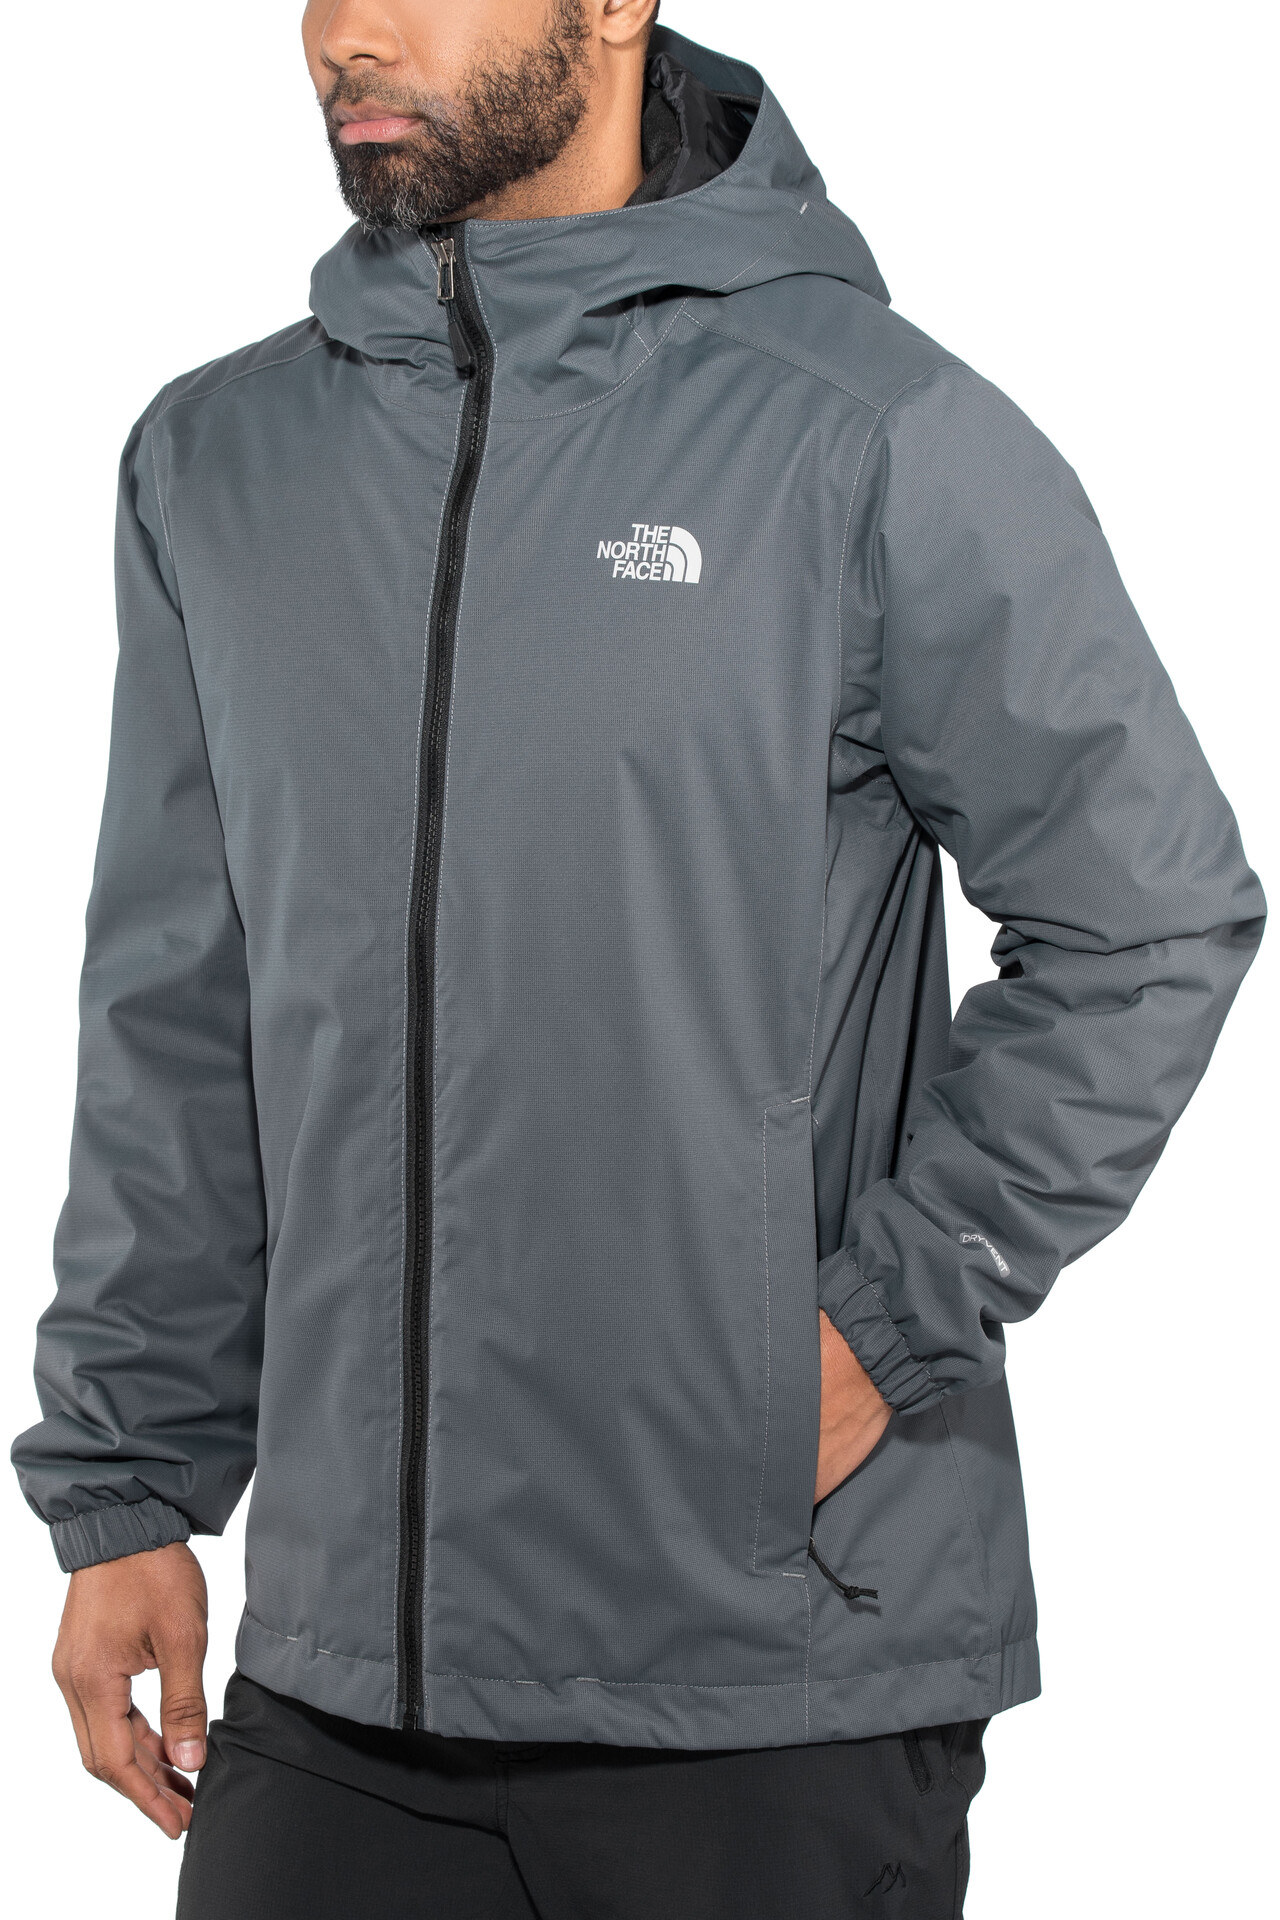 north face quest insulated jacket black